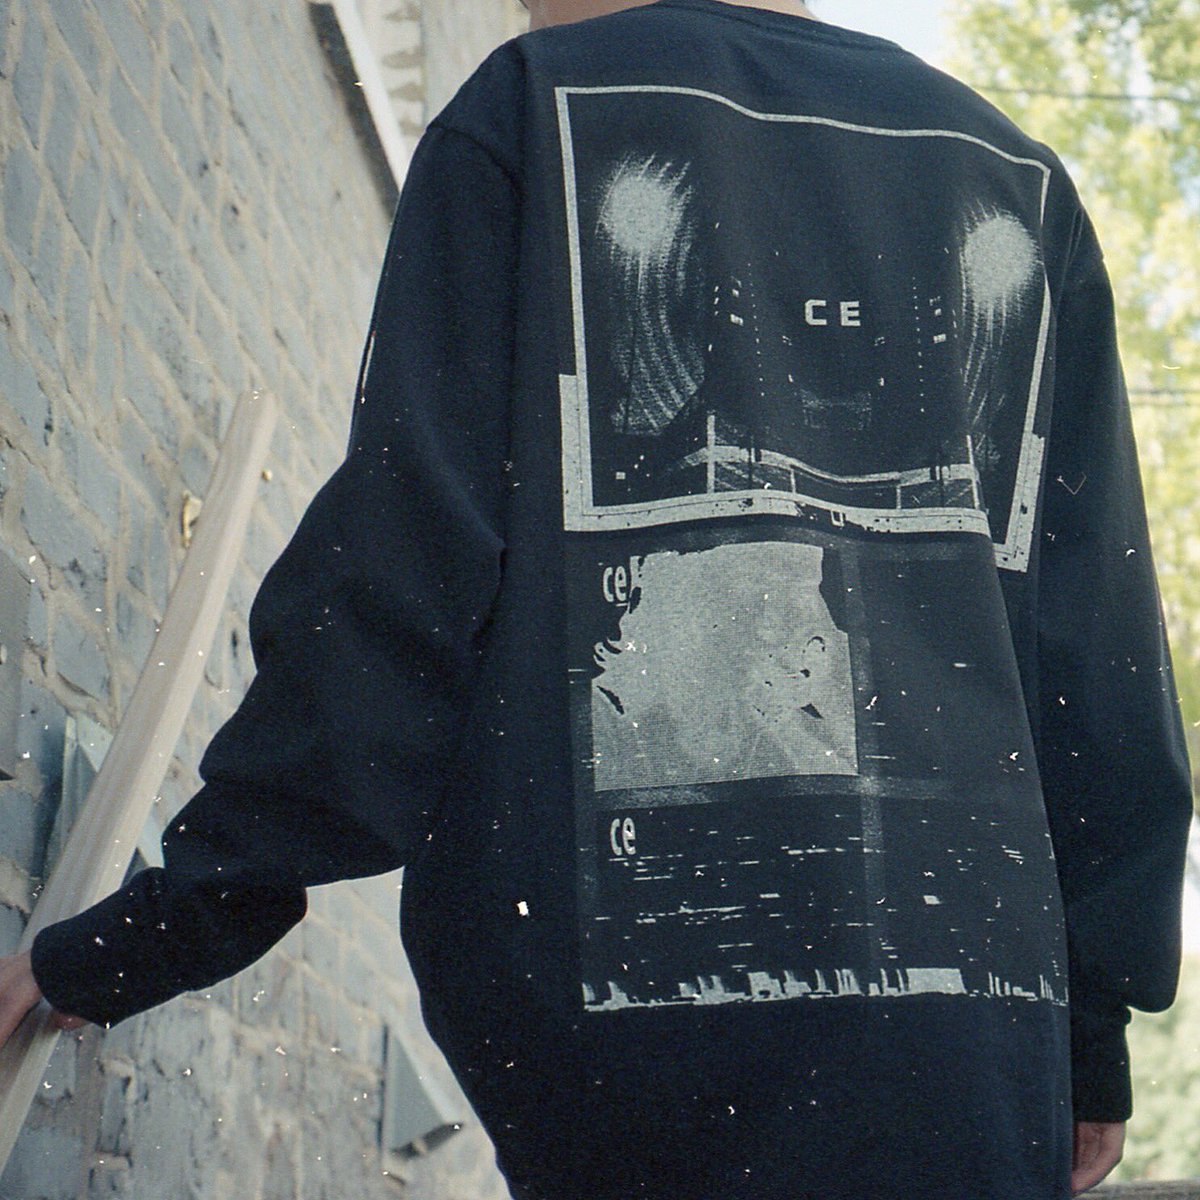 RSVP Gallery on Twitter: "Cav Empt Dark City Long Sleeve Tee 💡 Available  In-Store at RSVP Gallery ☎️📦🔋📡 https://t.co/RfMoWsJ9Hc" / Twitter